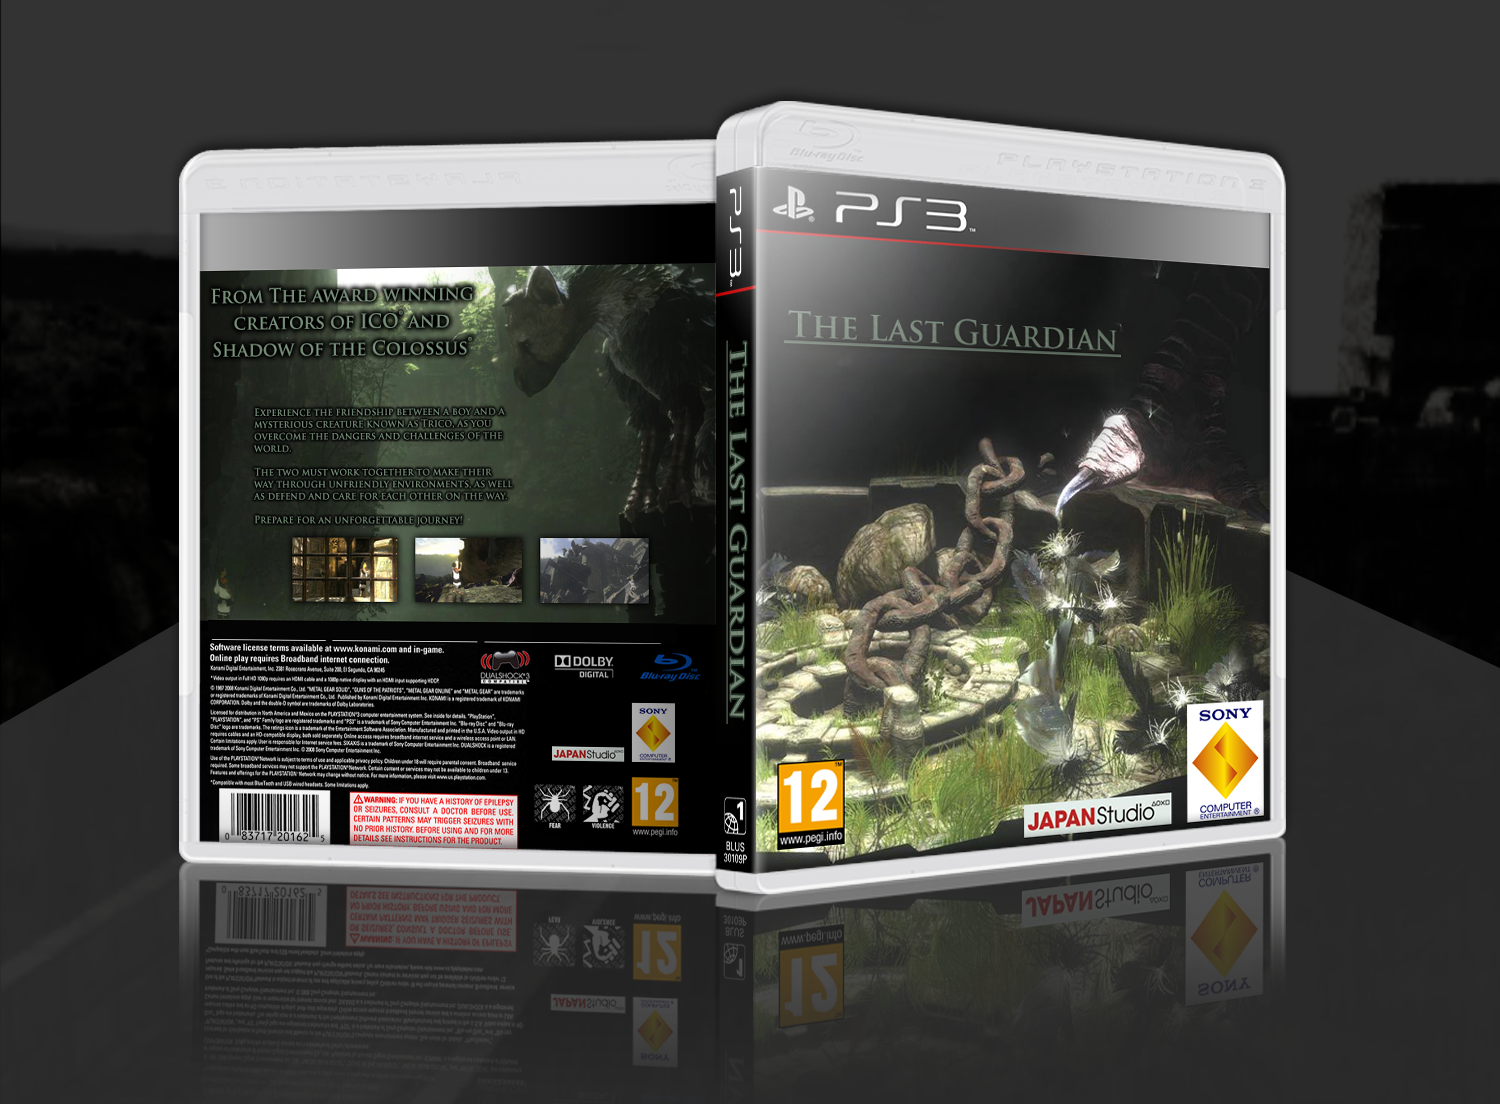 The Last Guardian box cover